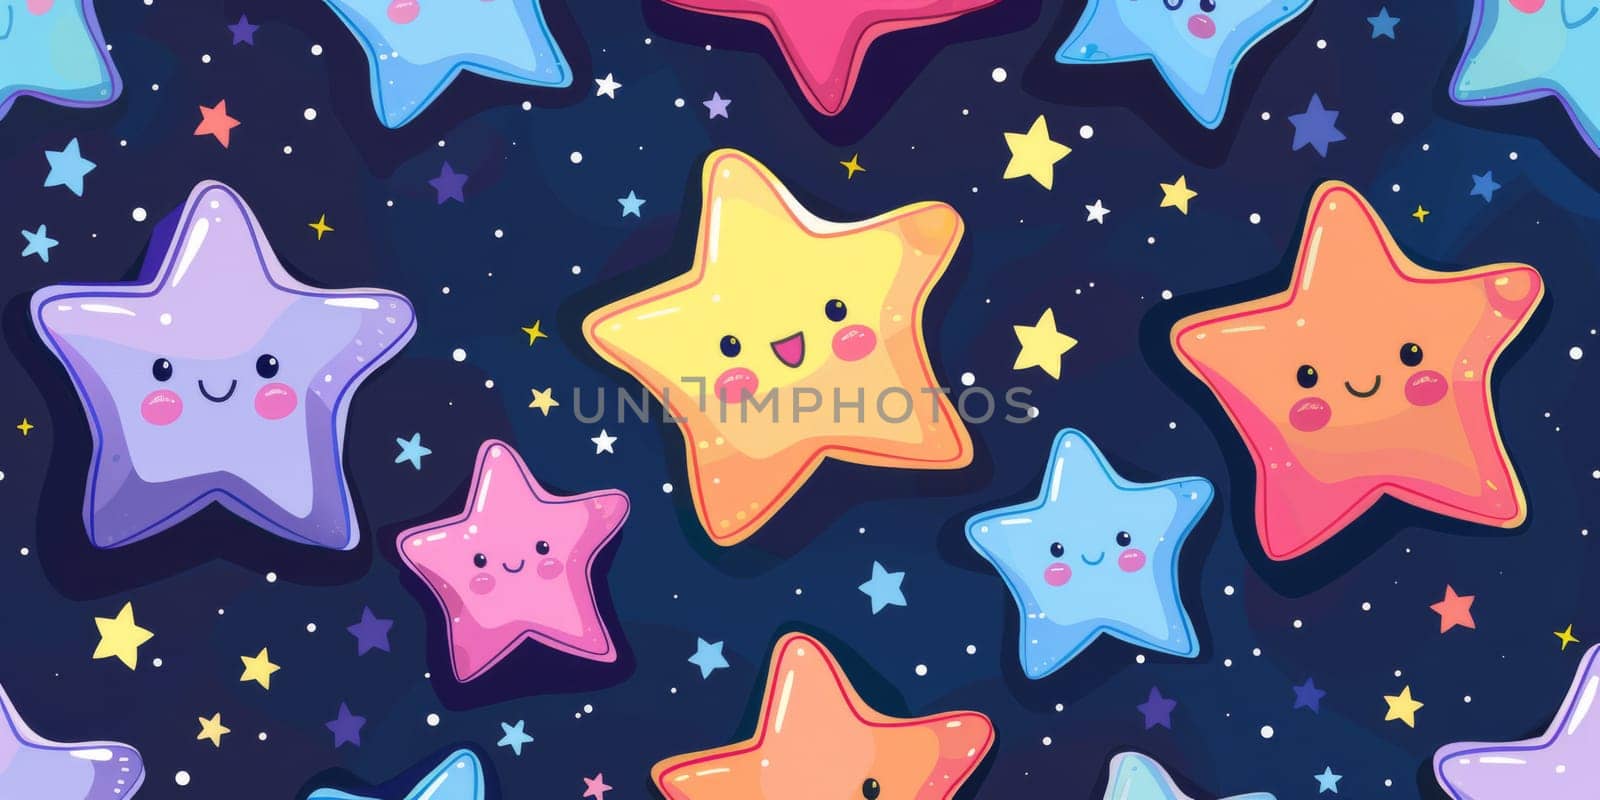 Cartoon smiling kid stars as a background and pattern